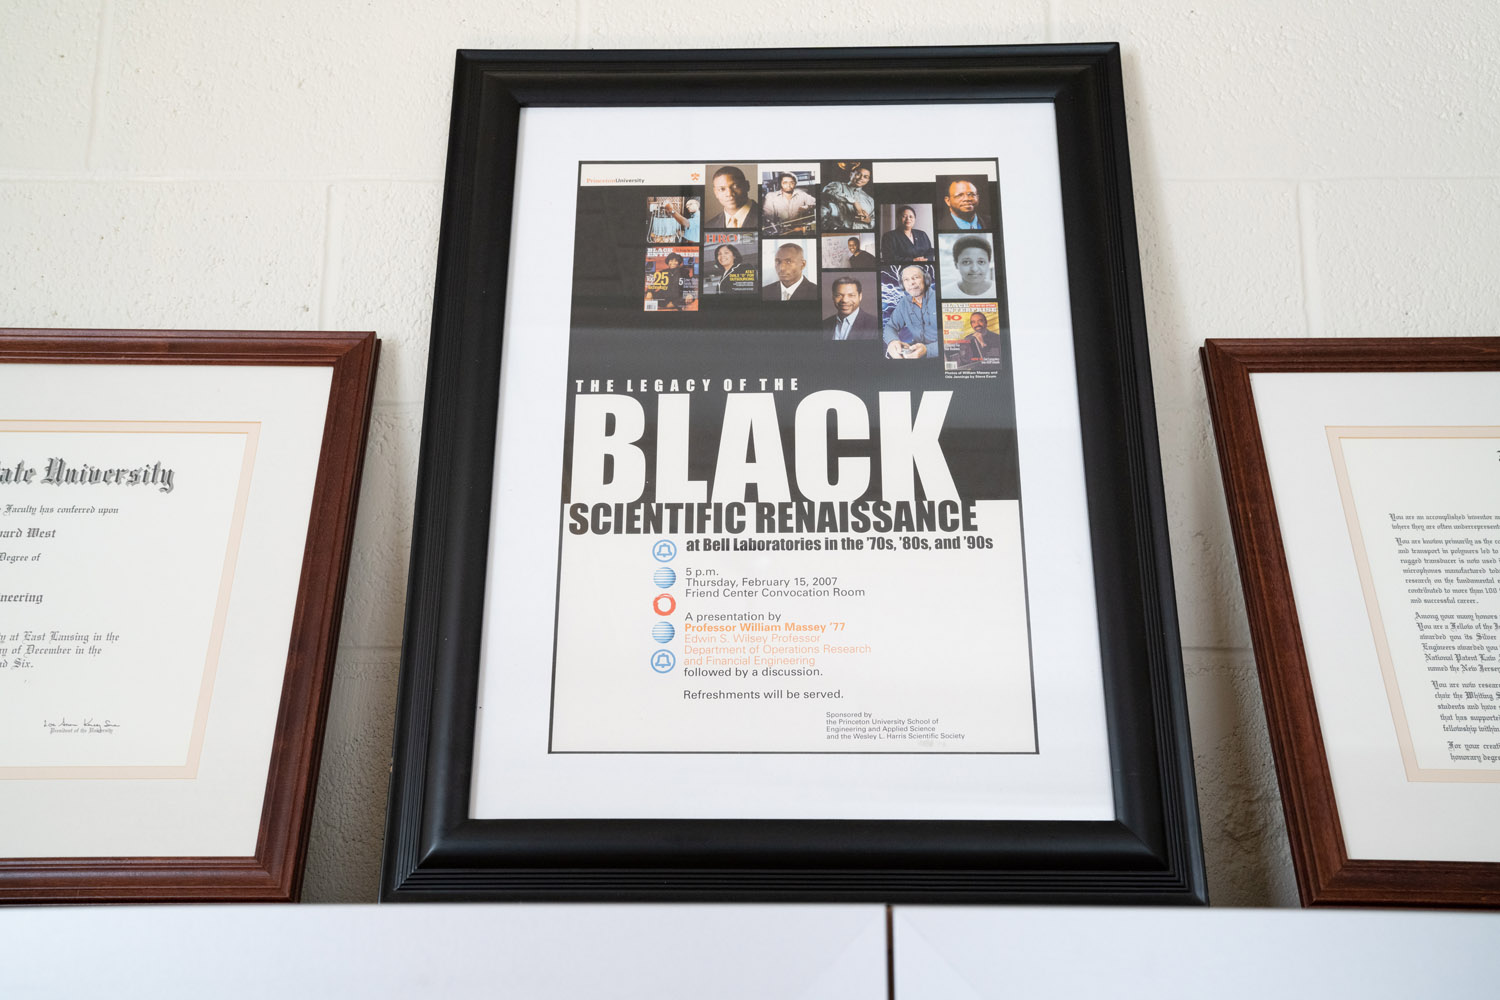 A framed announcement of an event in which Jim West was honored.